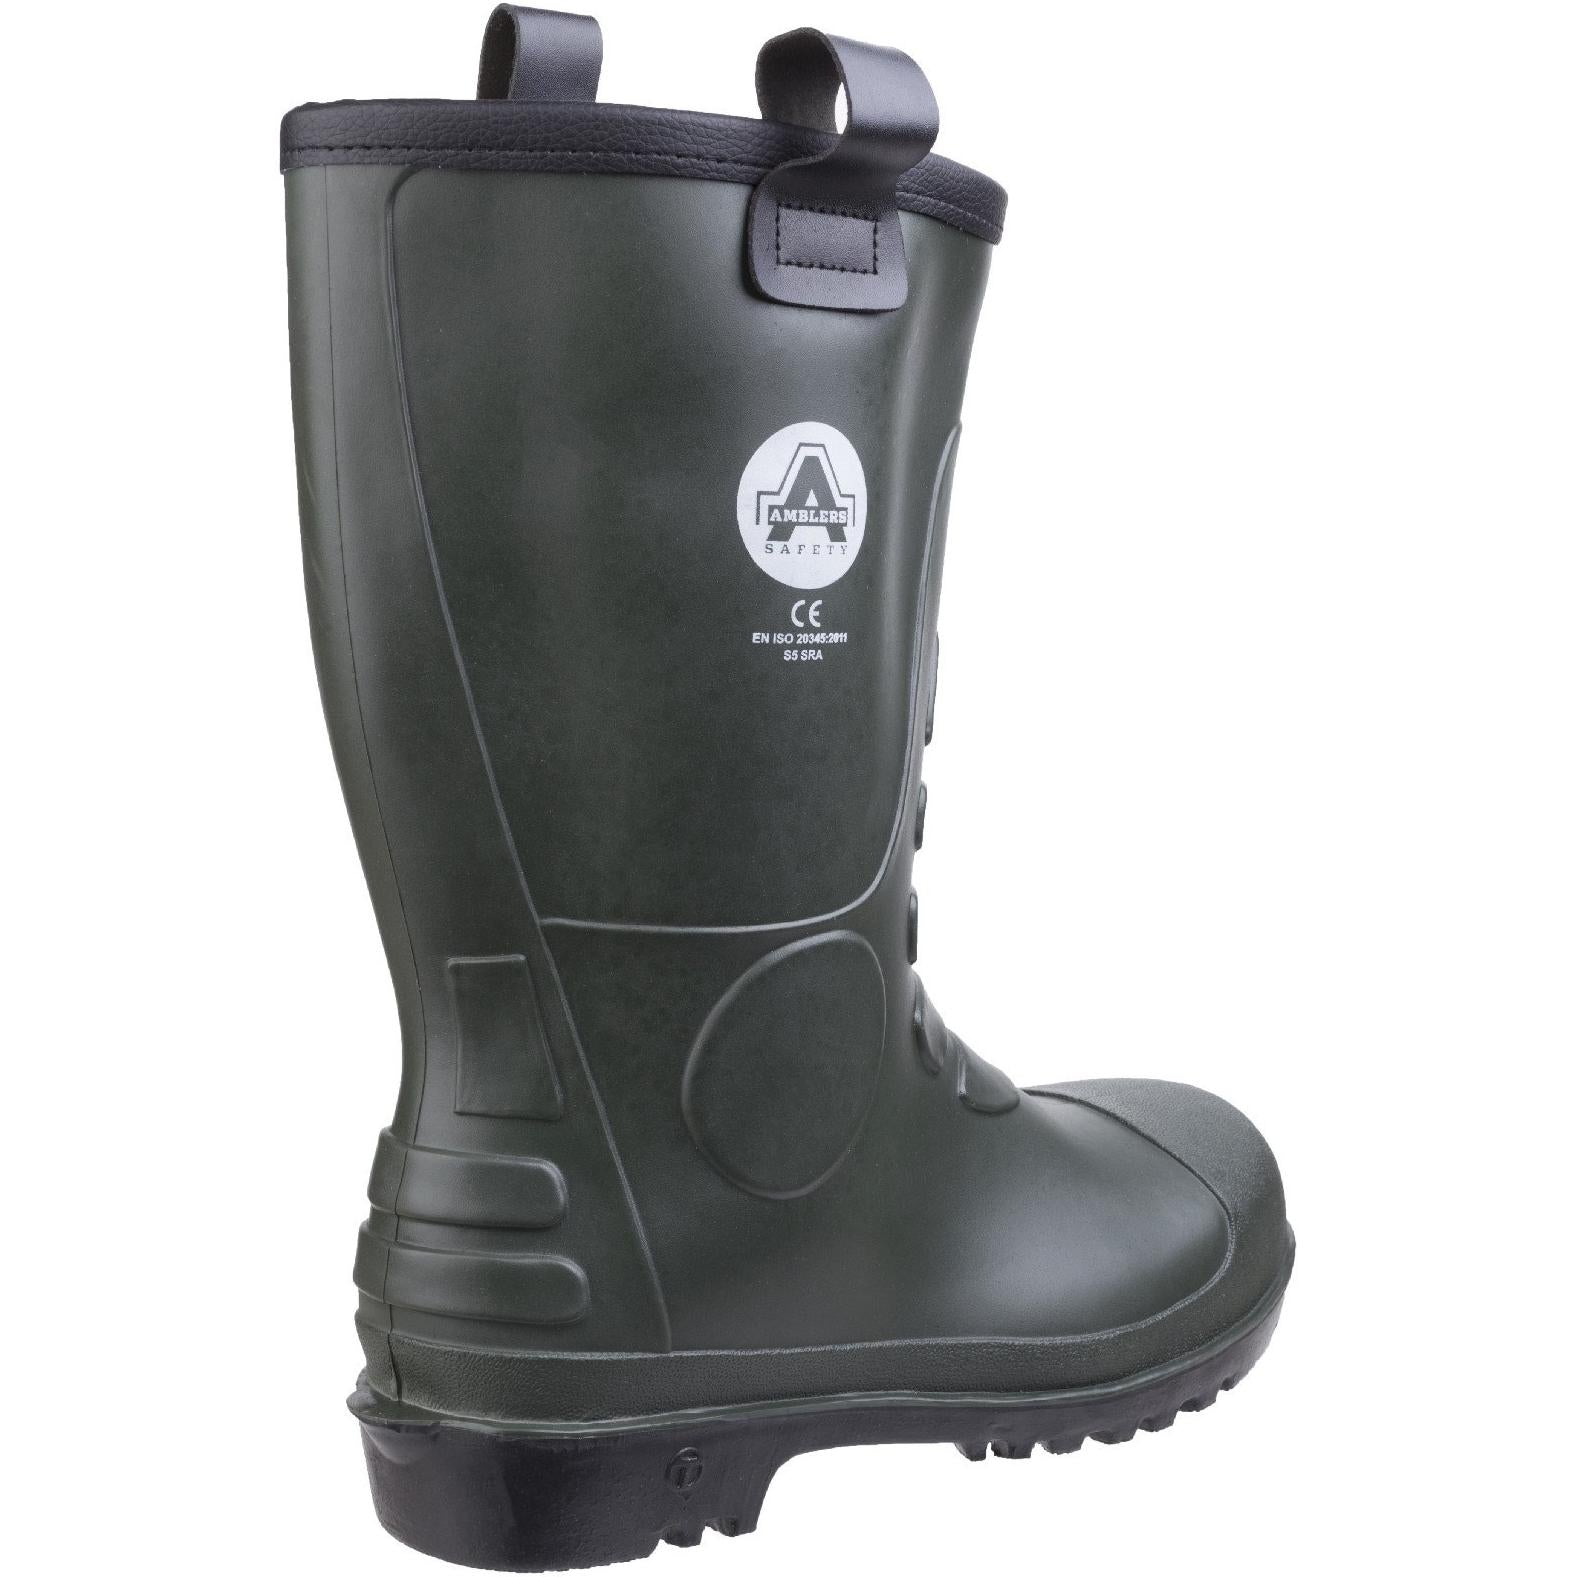 Amblers Safety FS97 PVC Rigger Safety Boot